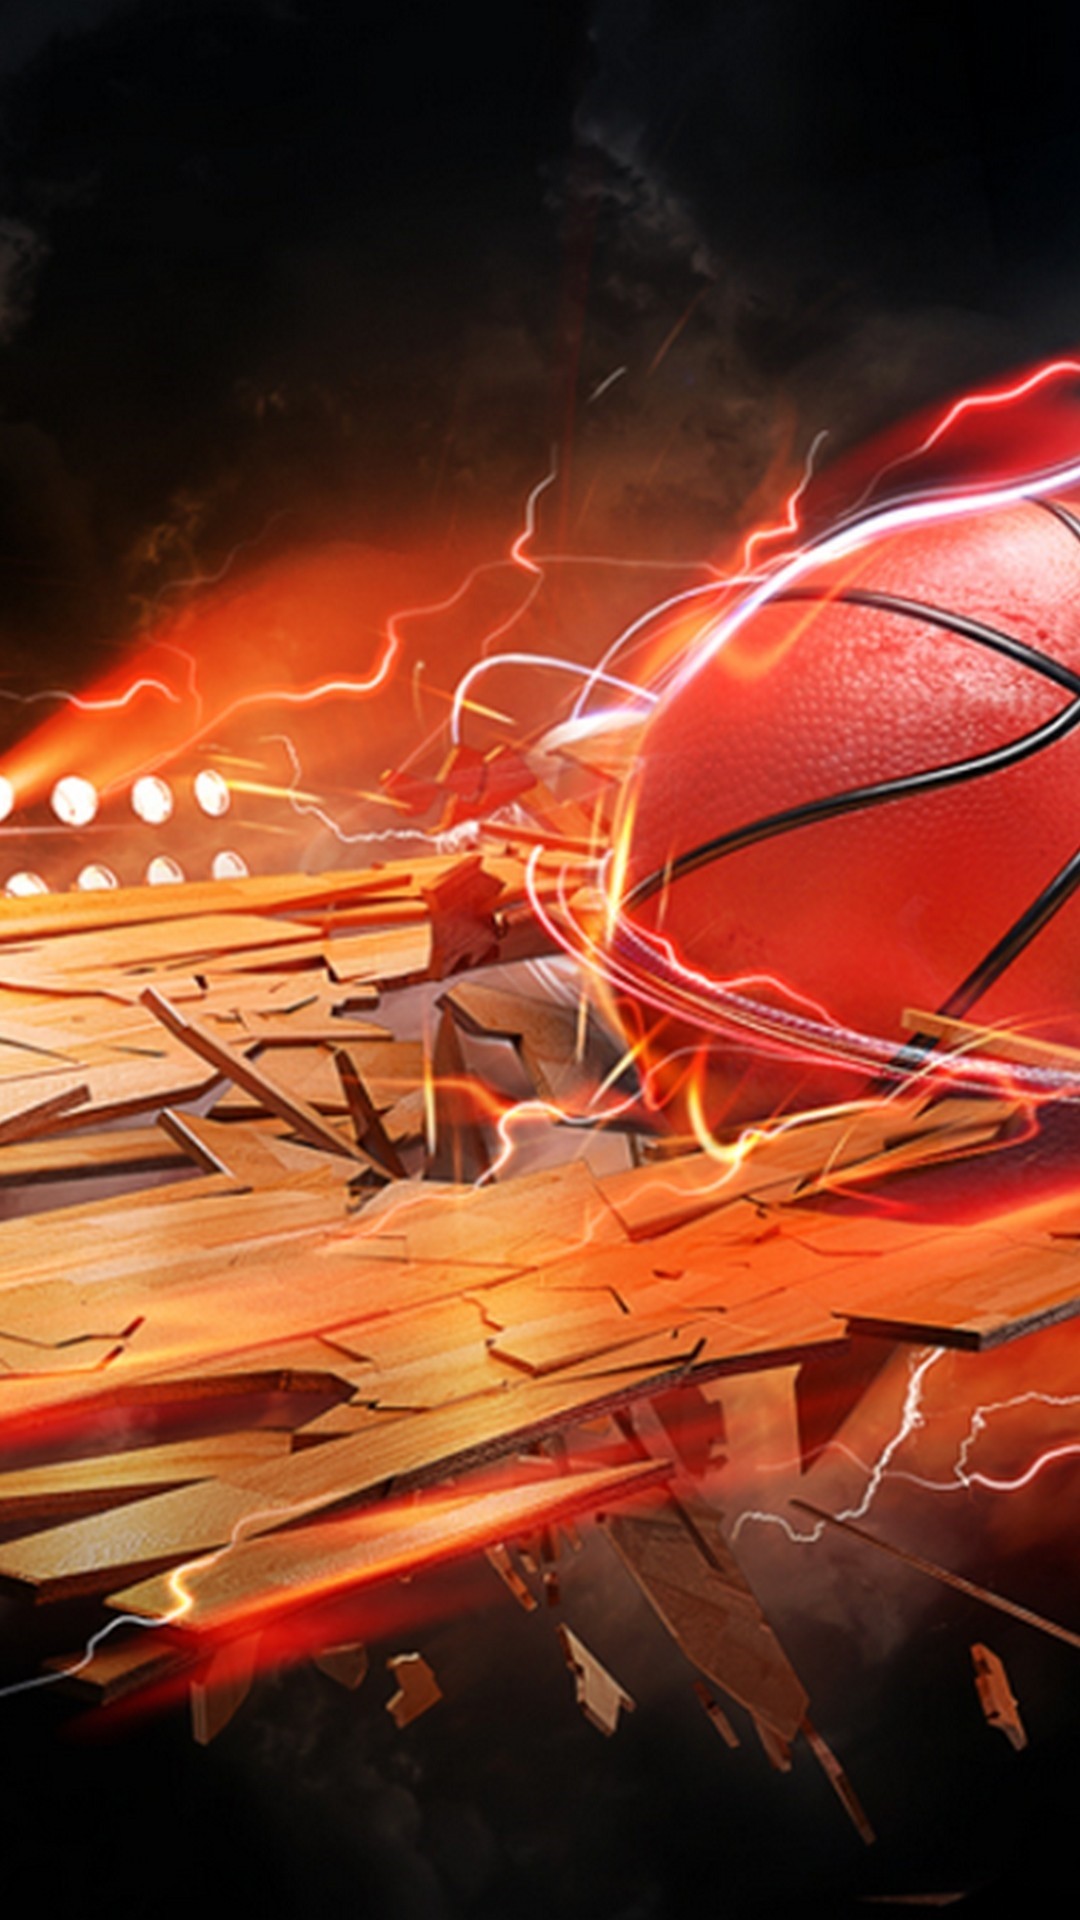 Basketball wallpaper for iPhone